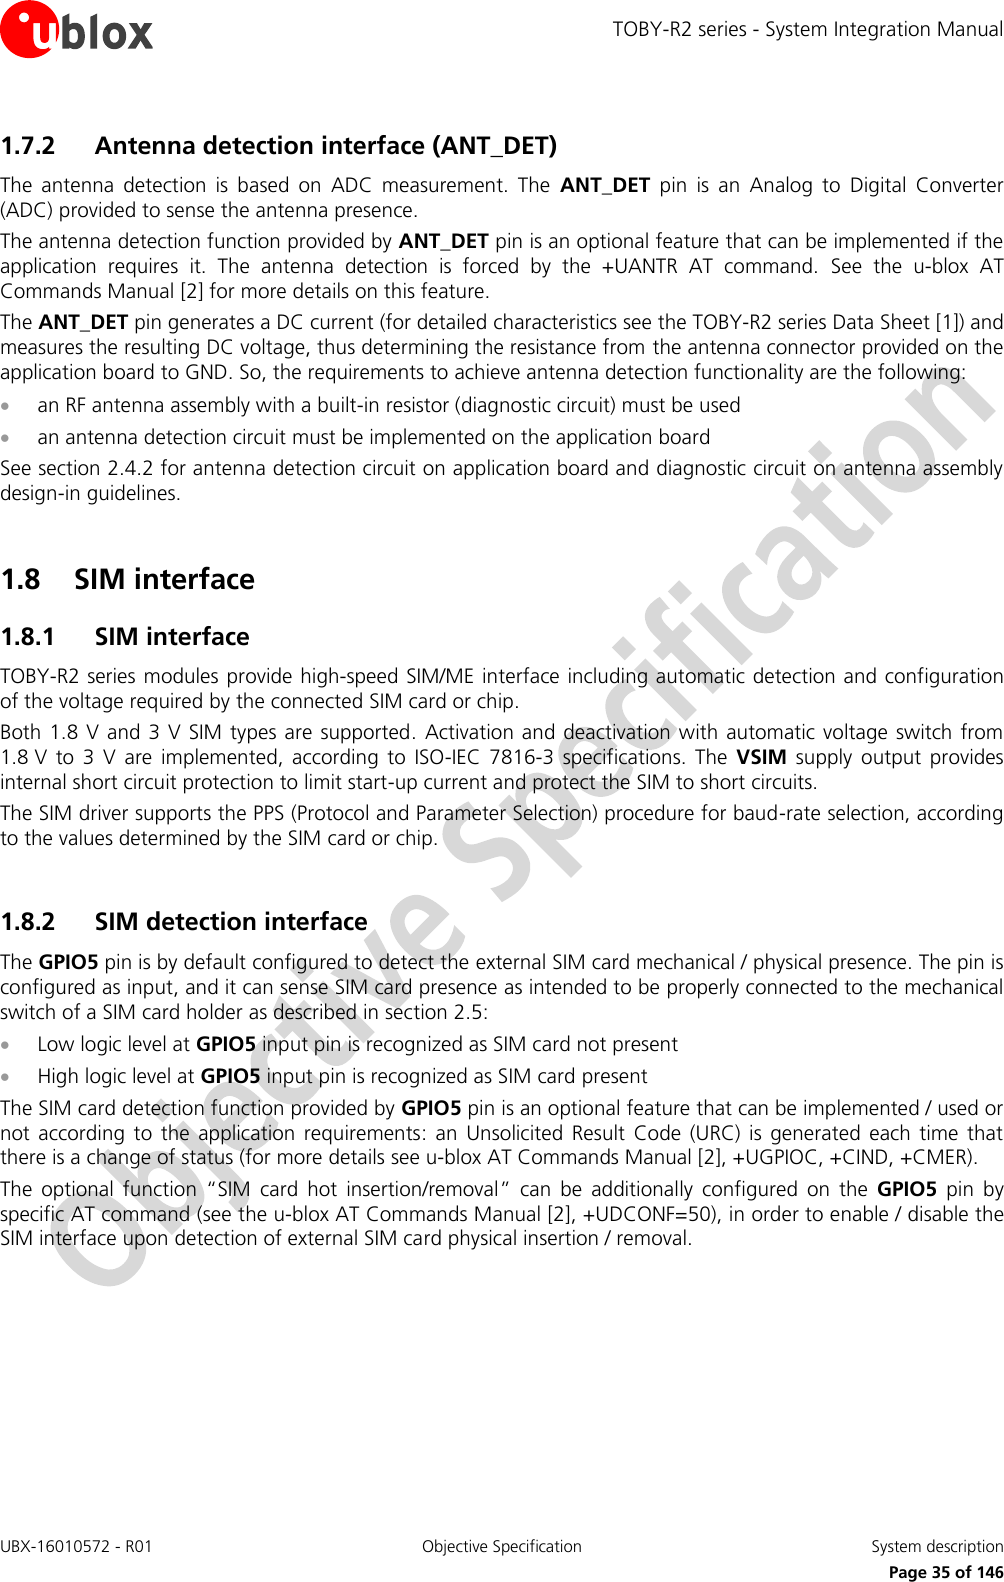 TOBY-R2 series - System Integration Manual UBX-16010572 - R01  Objective Specification  System description     Page 35 of 146 1.7.2 Antenna detection interface (ANT_DET) The  antenna  detection  is  based  on  ADC  measurement.  The  ANT_DET  pin  is  an  Analog  to  Digital  Converter (ADC) provided to sense the antenna presence. The antenna detection function provided by ANT_DET pin is an optional feature that can be implemented if the application  requires  it.  The  antenna  detection  is  forced  by  the  +UANTR  AT  command.  See  the  u-blox  AT Commands Manual [2] for more details on this feature. The ANT_DET pin generates a DC current (for detailed characteristics see the TOBY-R2 series Data Sheet [1]) and measures the resulting DC voltage, thus determining the resistance from the antenna connector provided on the application board to GND. So, the requirements to achieve antenna detection functionality are the following:  an RF antenna assembly with a built-in resistor (diagnostic circuit) must be used  an antenna detection circuit must be implemented on the application board See section 2.4.2 for antenna detection circuit on application board and diagnostic circuit on antenna assembly design-in guidelines.  1.8 SIM interface 1.8.1 SIM interface TOBY-R2 series modules provide high-speed SIM/ME interface including automatic detection and configuration of the voltage required by the connected SIM card or chip. Both 1.8 V and 3 V SIM types  are supported. Activation  and  deactivation with automatic  voltage switch from 1.8 V  to  3  V  are  implemented,  according  to  ISO-IEC  7816-3  specifications.  The  VSIM  supply  output  provides internal short circuit protection to limit start-up current and protect the SIM to short circuits. The SIM driver supports the PPS (Protocol and Parameter Selection) procedure for baud-rate selection, according to the values determined by the SIM card or chip.  1.8.2 SIM detection interface The GPIO5 pin is by default configured to detect the external SIM card mechanical / physical presence. The pin is configured as input, and it can sense SIM card presence as intended to be properly connected to the mechanical switch of a SIM card holder as described in section 2.5:  Low logic level at GPIO5 input pin is recognized as SIM card not present  High logic level at GPIO5 input pin is recognized as SIM card present The SIM card detection function provided by GPIO5 pin is an optional feature that can be implemented / used or not  according  to  the  application  requirements:  an  Unsolicited  Result  Code  (URC)  is generated  each  time  that there is a change of status (for more details see u-blox AT Commands Manual [2], +UGPIOC, +CIND, +CMER). The  optional  function  “SIM  card  hot  insertion/removal”  can  be  additionally  configured  on  the  GPIO5  pin  by specific AT command (see the u-blox AT Commands Manual [2], +UDCONF=50), in order to enable / disable the SIM interface upon detection of external SIM card physical insertion / removal.  